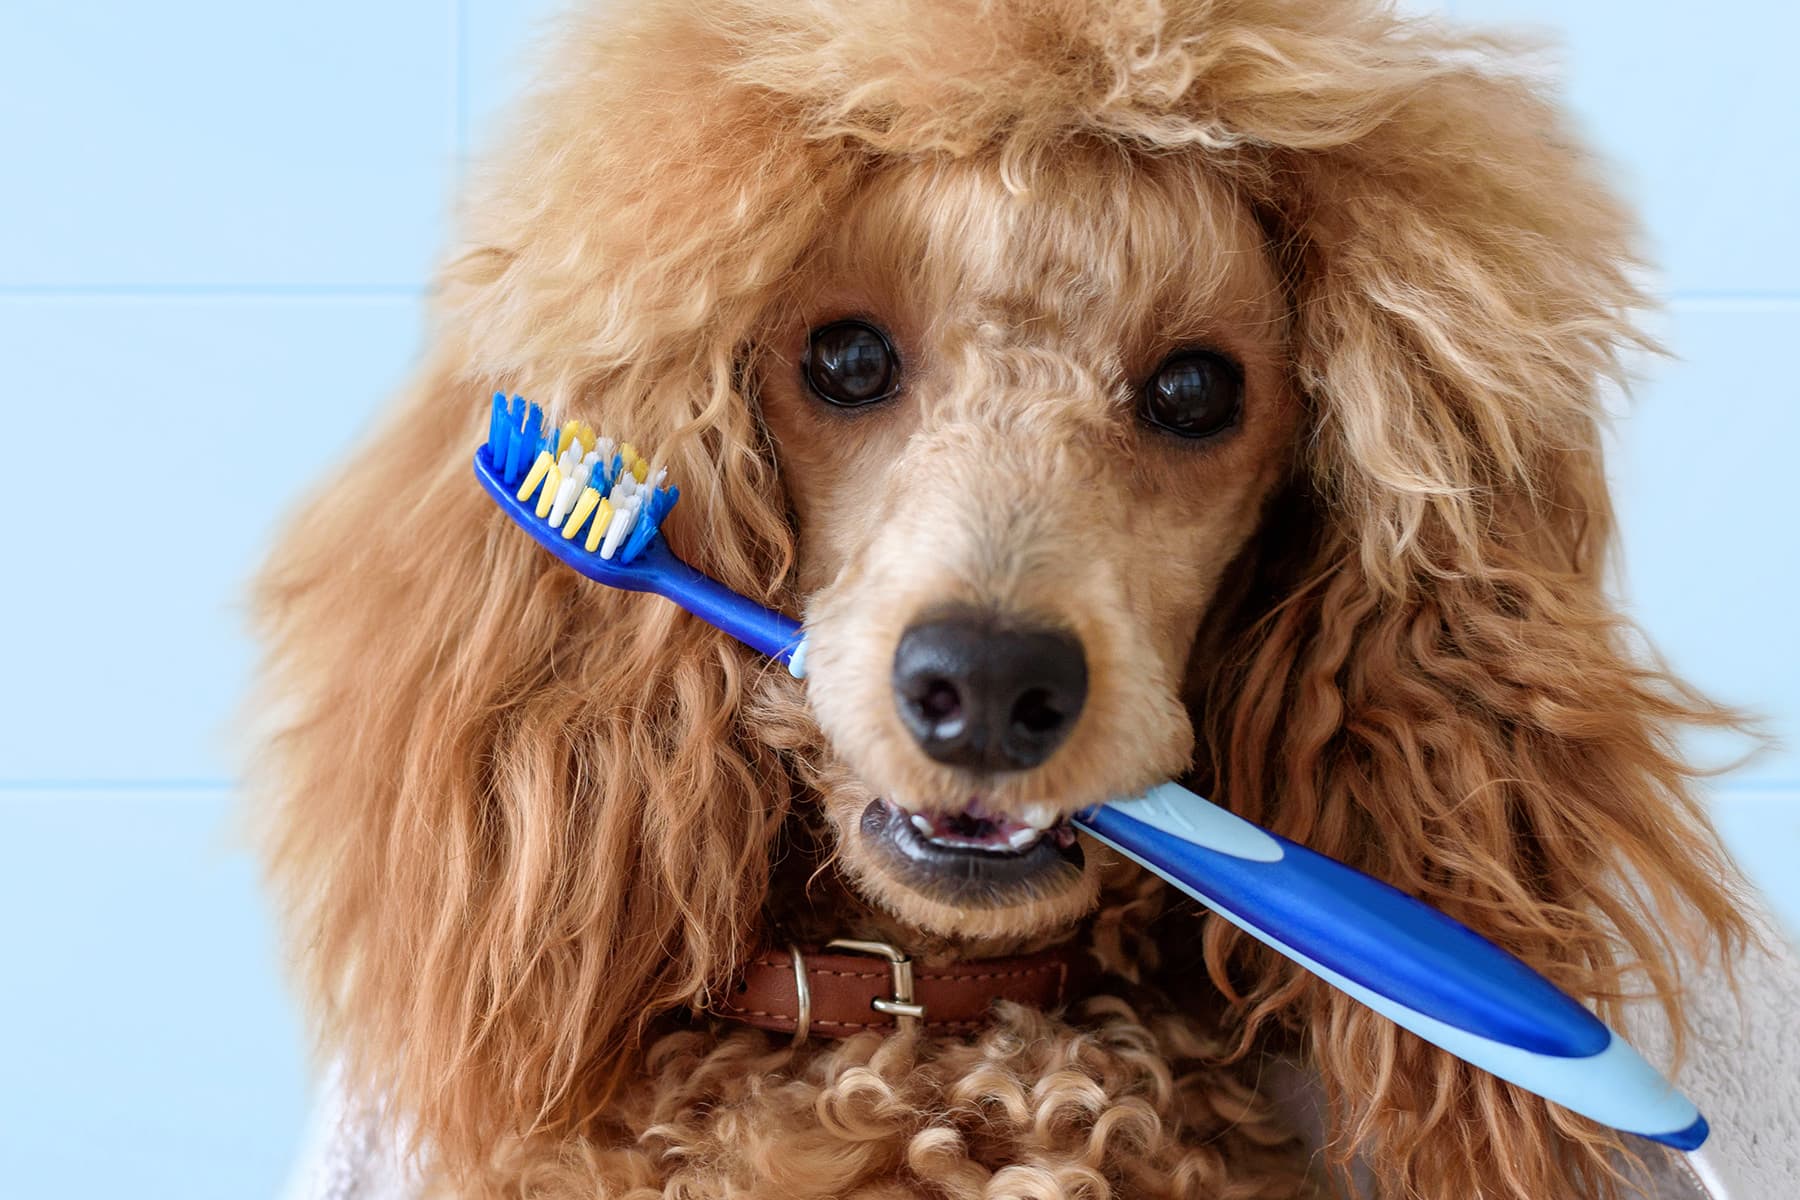 Top Tips For Taking Care of Your Dog’s Teeth